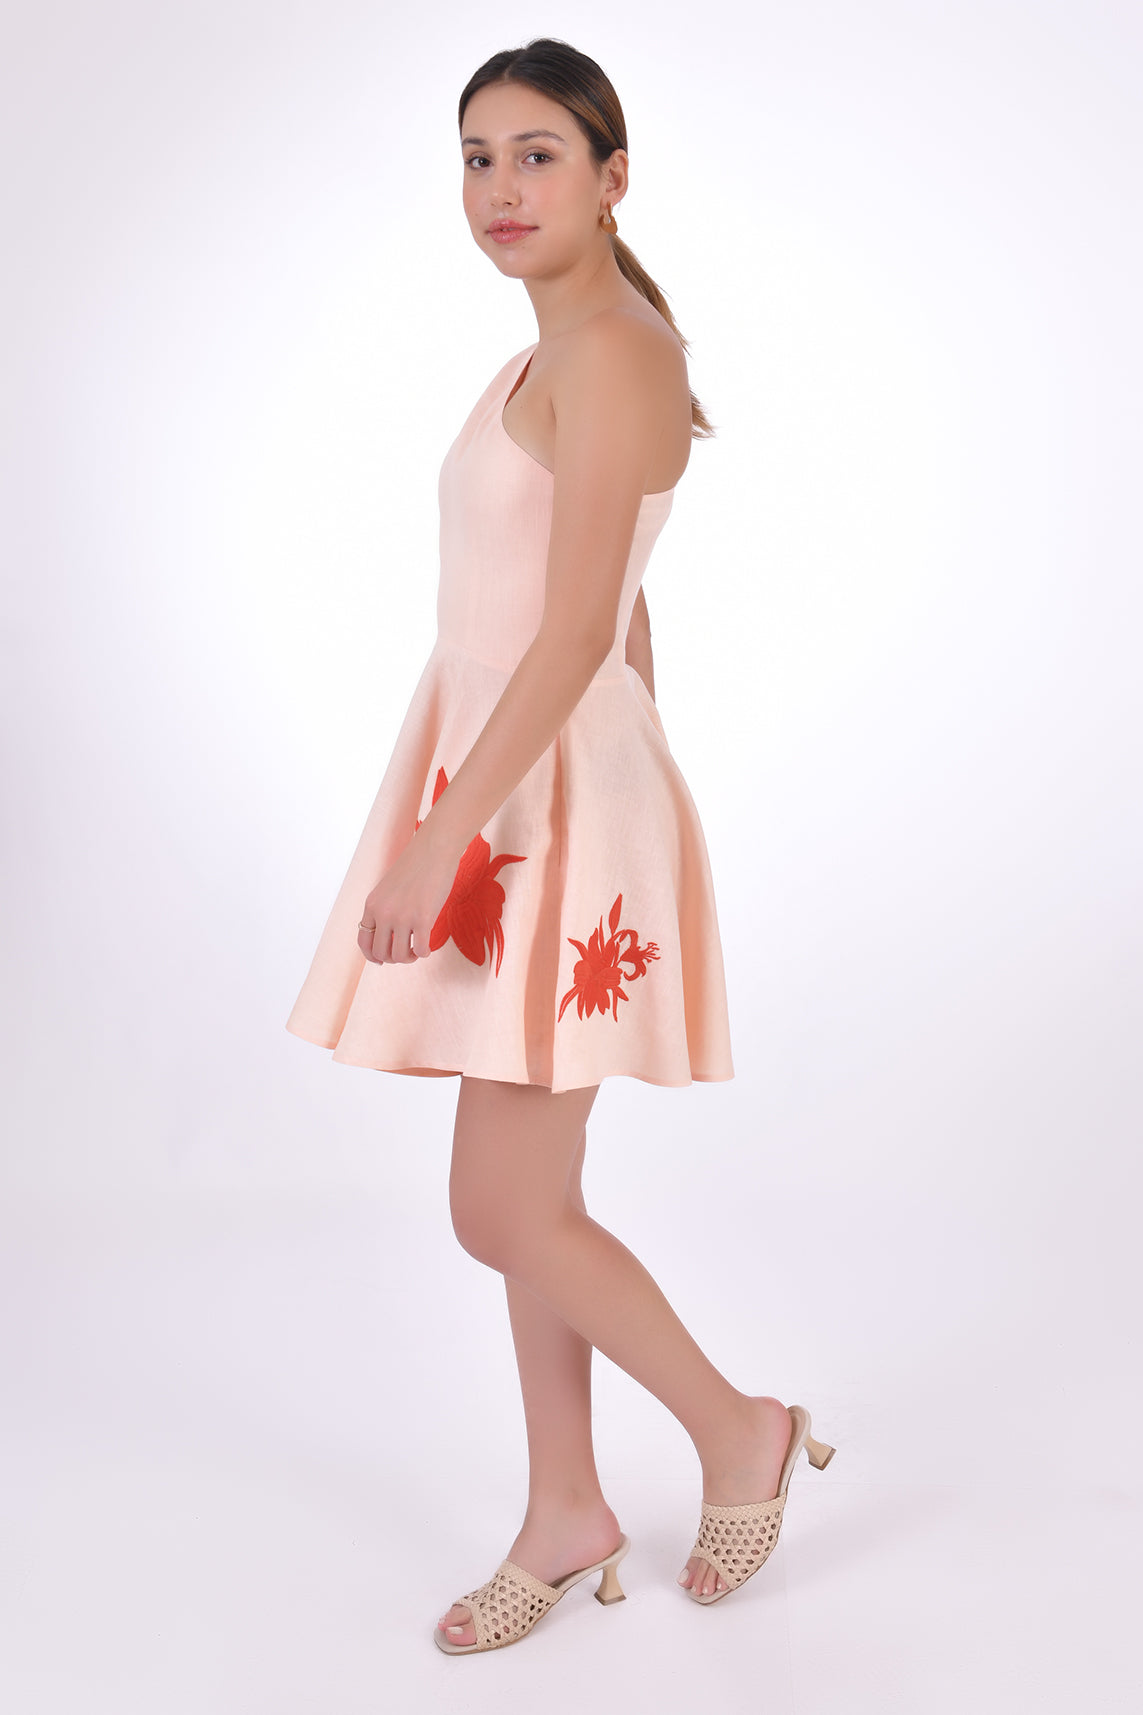 Fanm Mon Eftelya Linen Dress (Side View without Bow). Mini One Shoulder Linen Dress with a full circle skirt, detachable bow detail, hidden side zipper, and embroidery on the skirt.